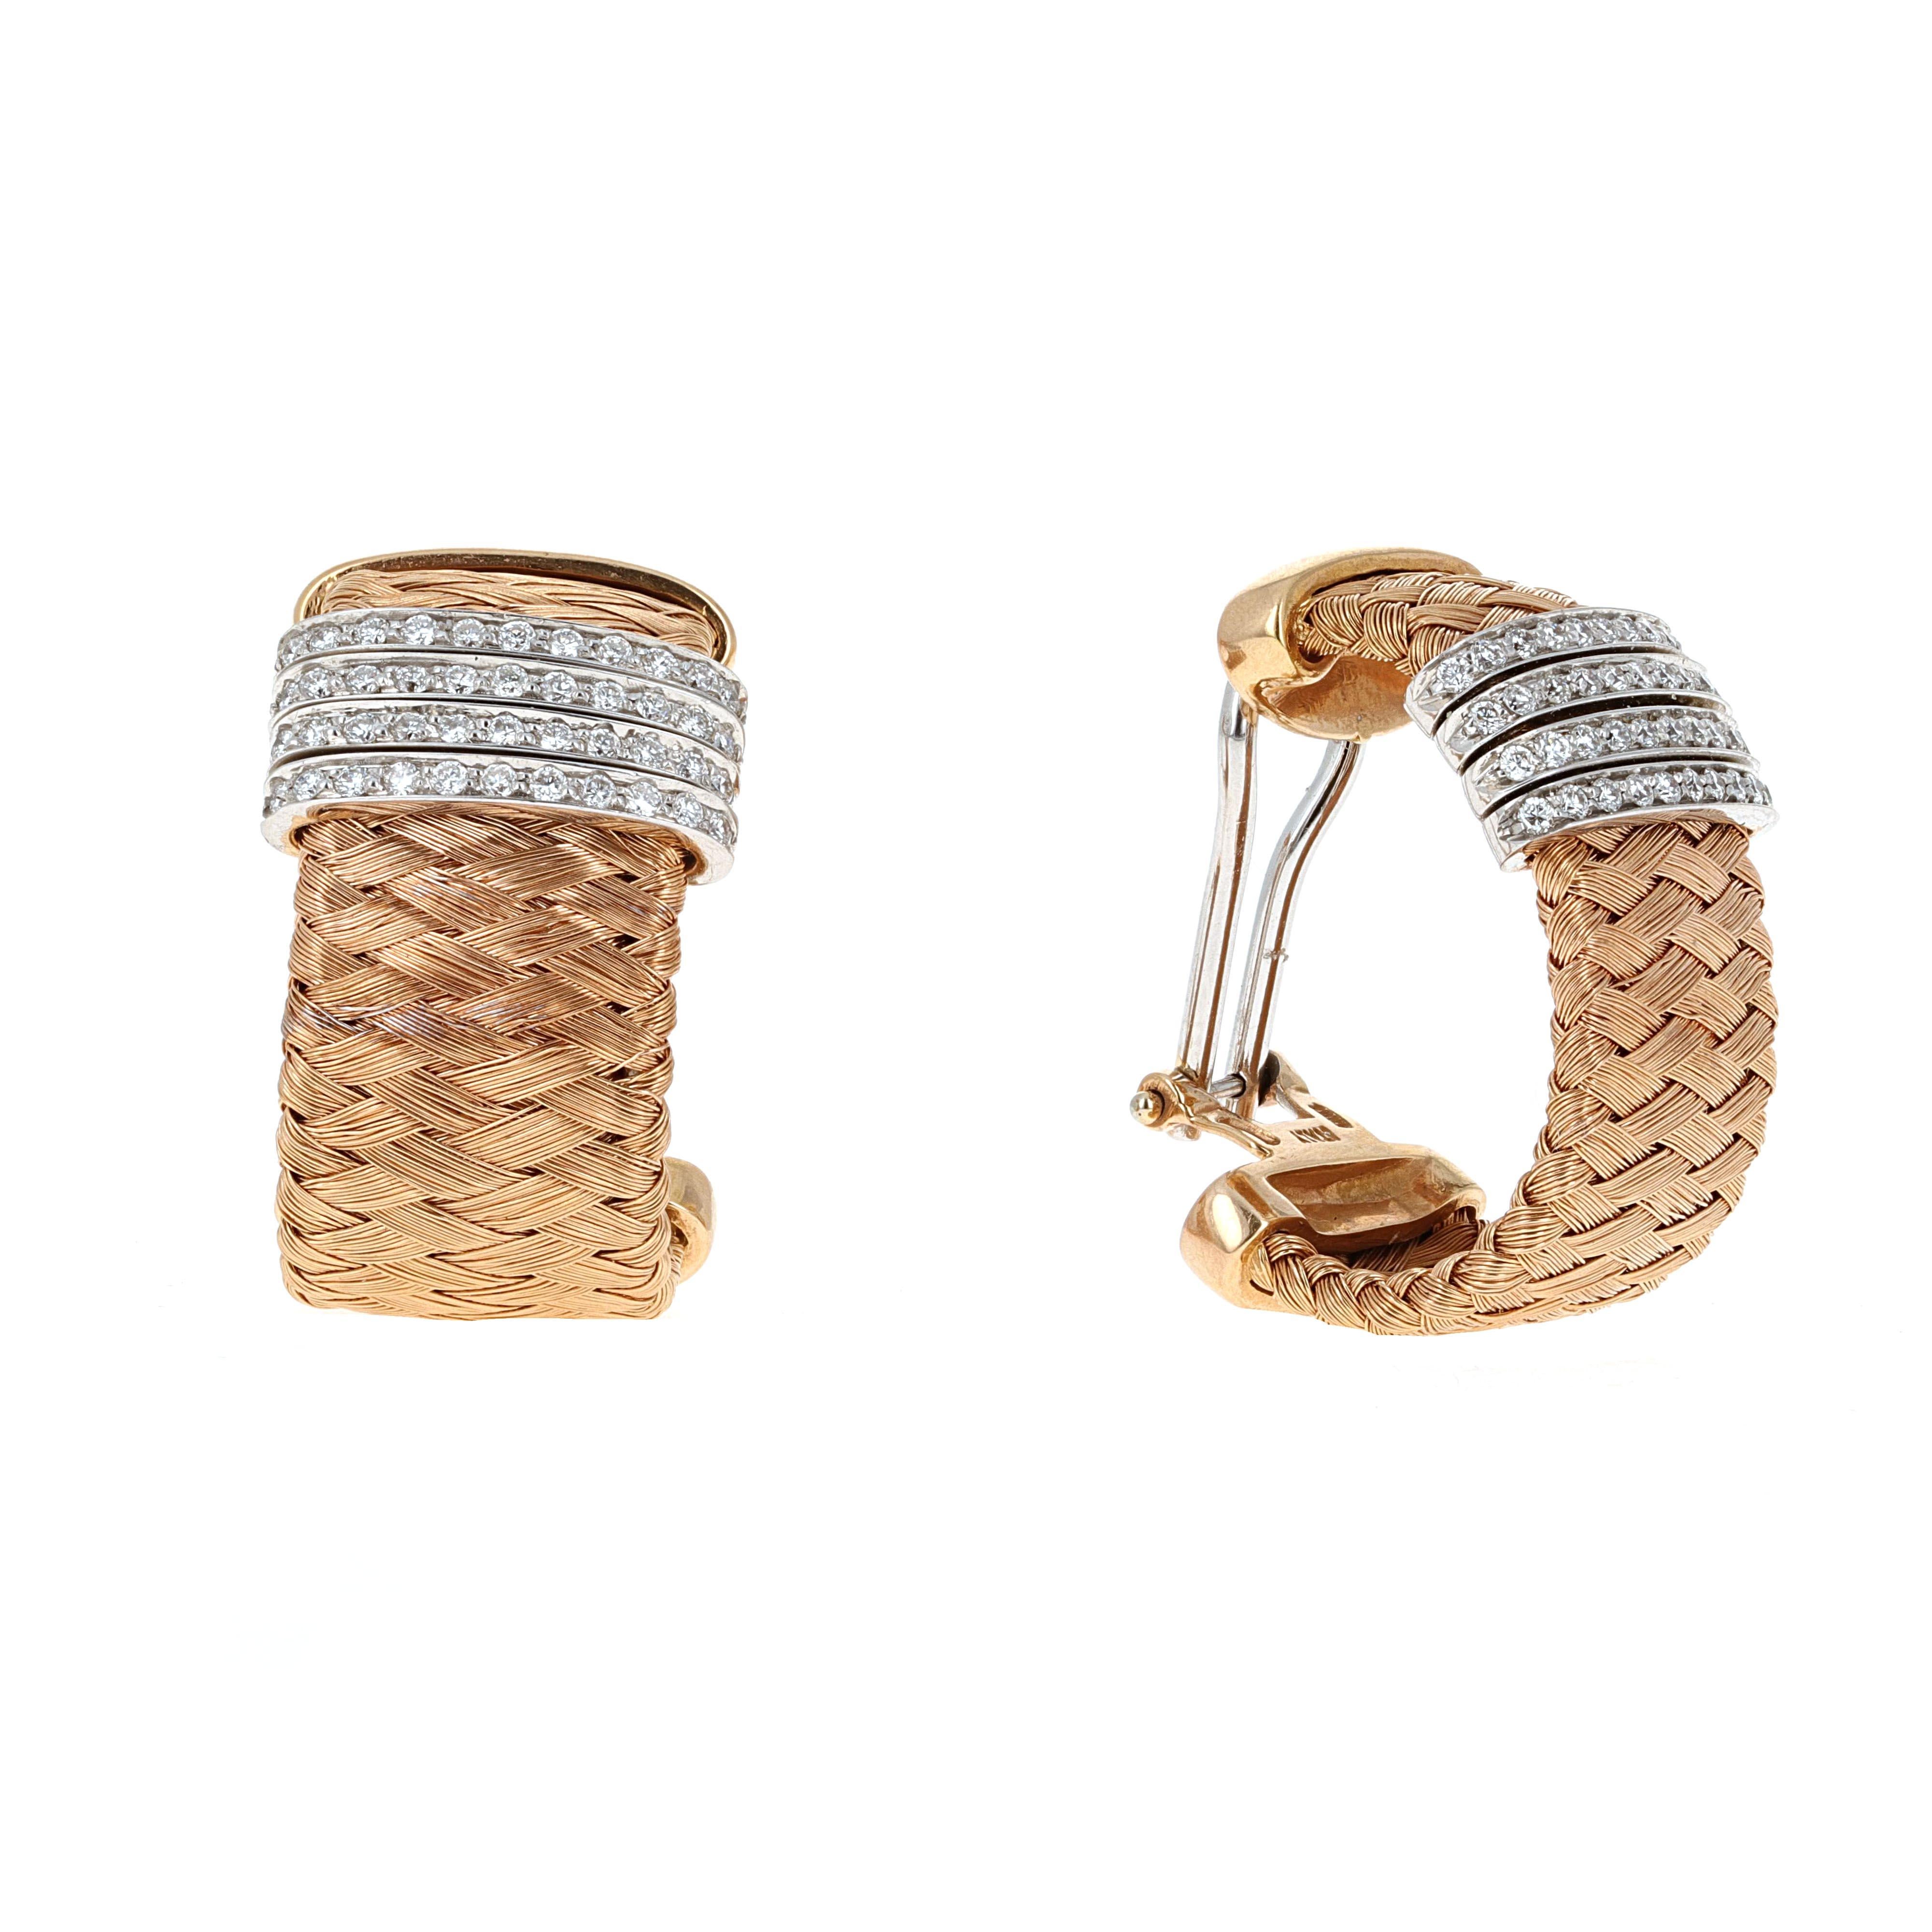 Roberto Coin 18 karat two tone yellow and white gold silk weave diamond earrings. The earrings are stamped 